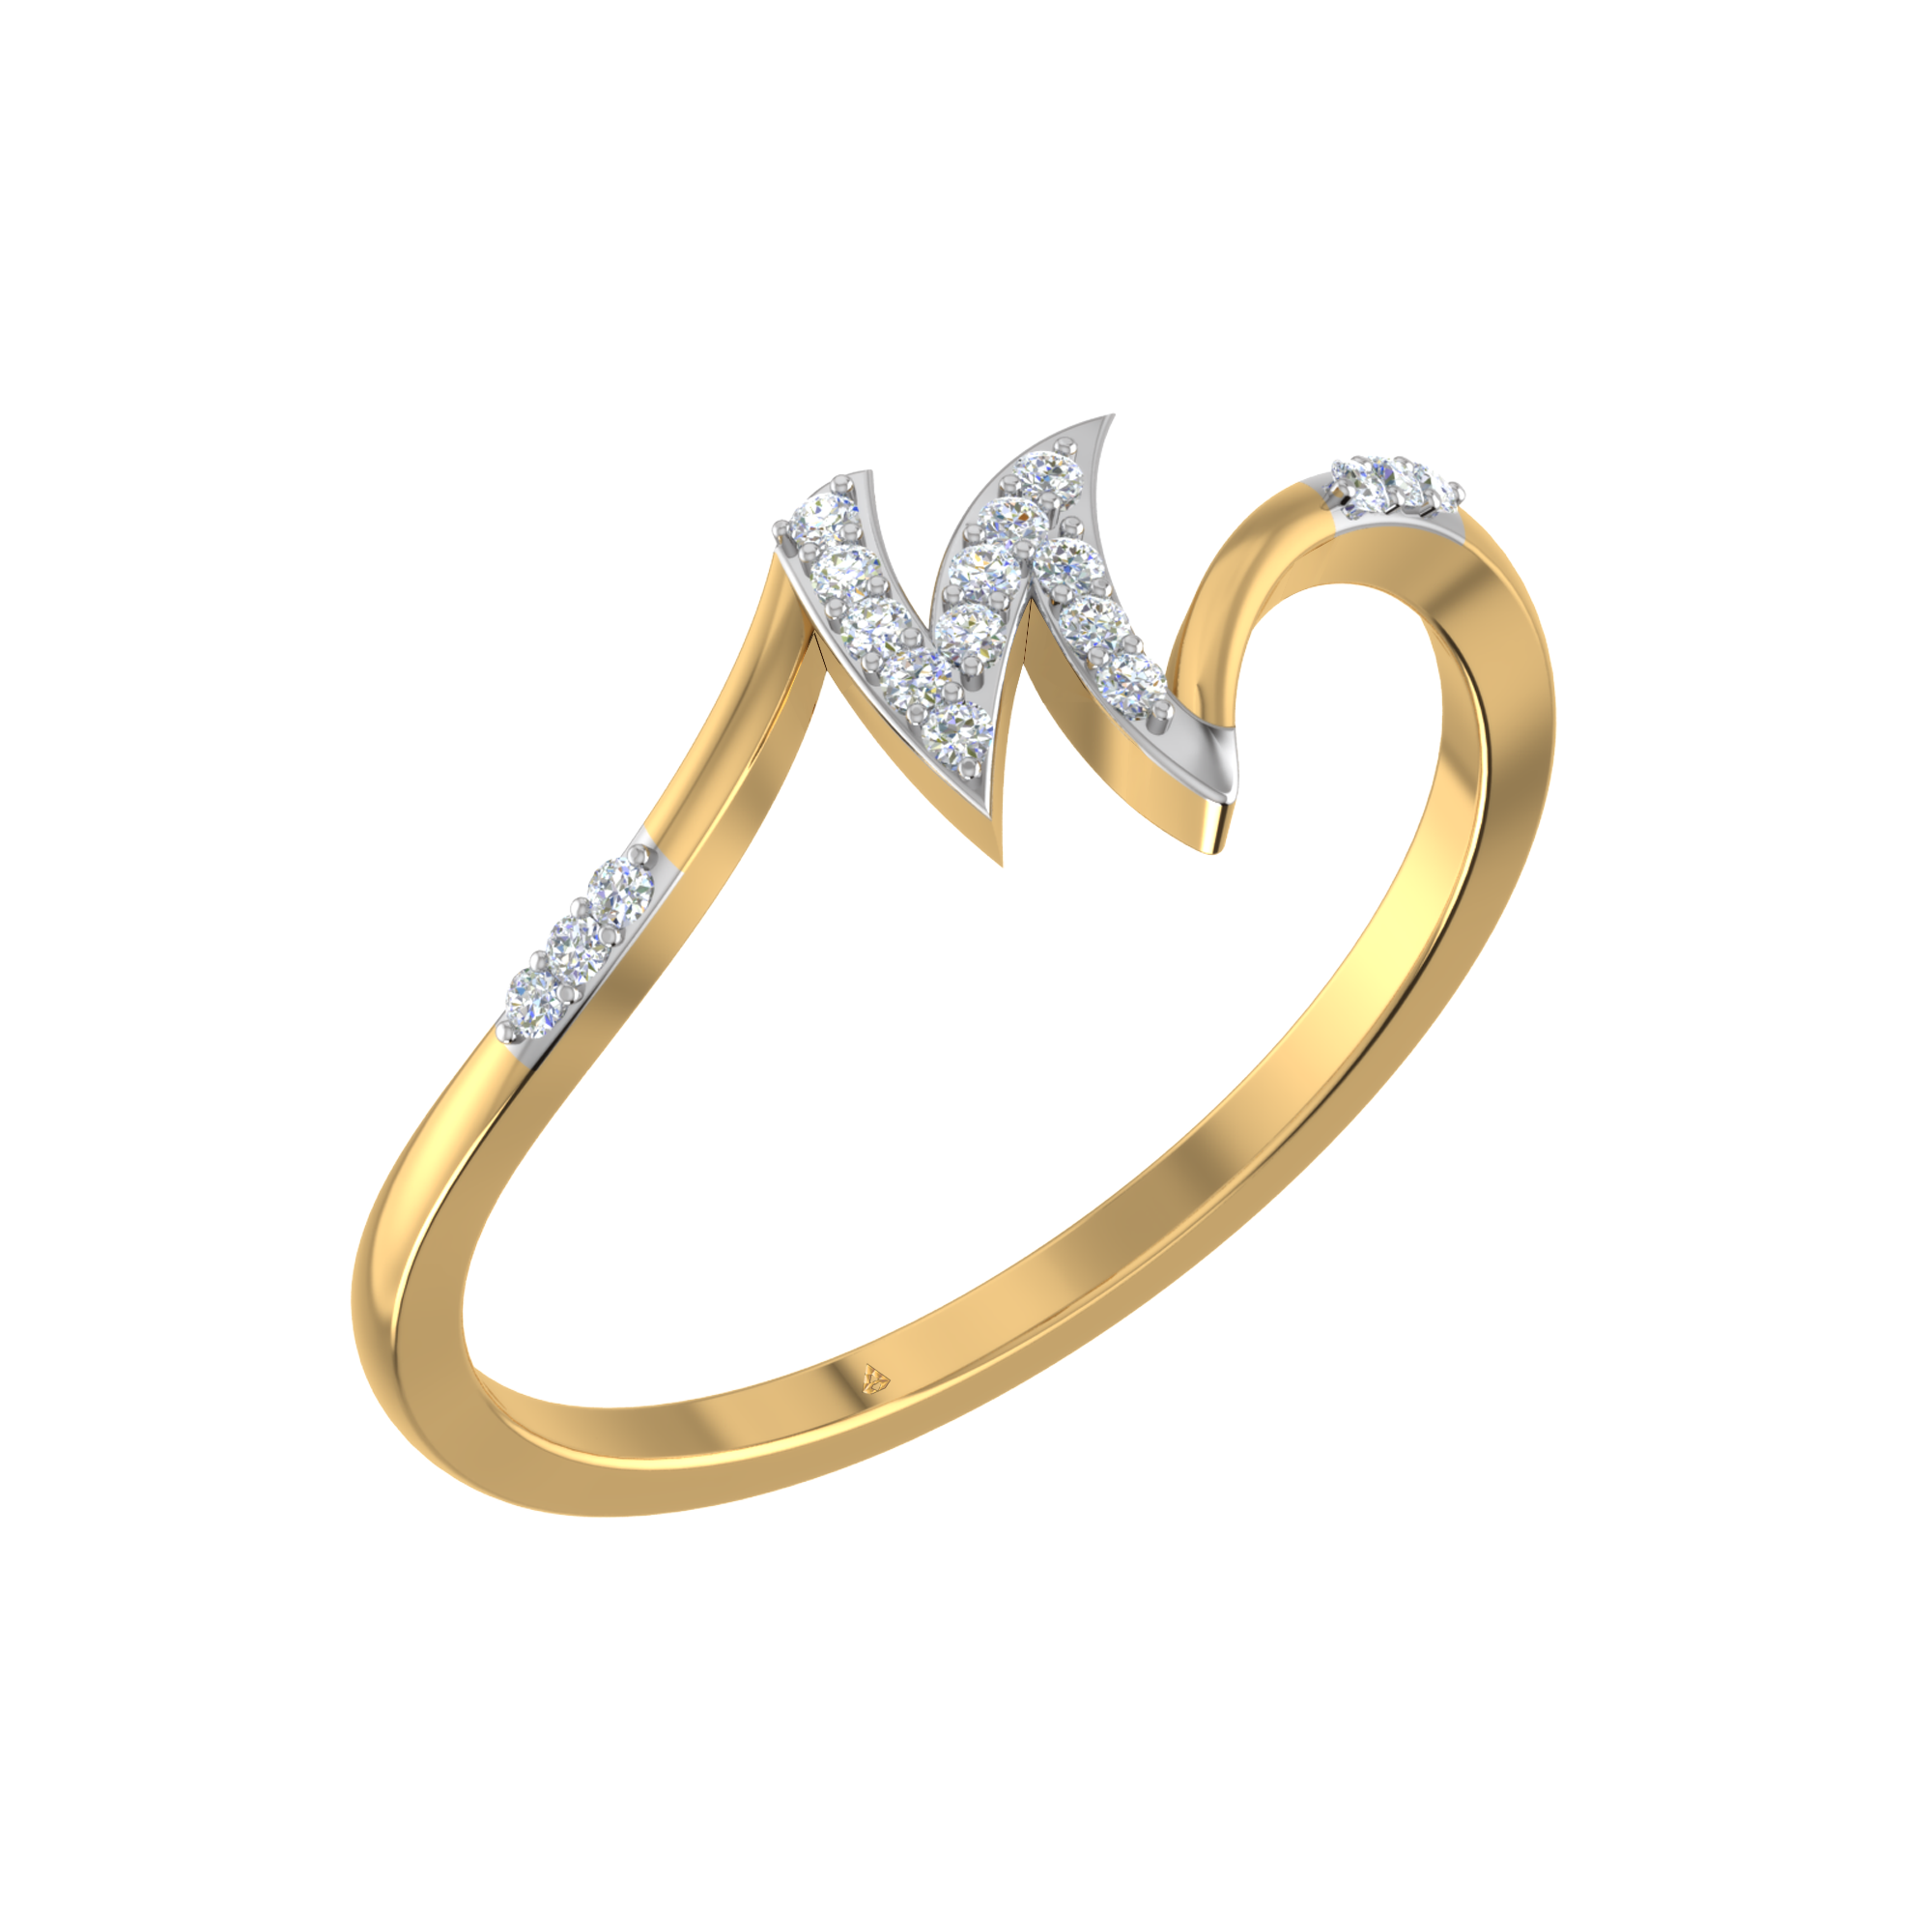 Buy Valentine gift Jewellery Stylish Heart Shape Golden Proposal i love you  Name Alphabet Letter Initial N Rings for girls women girlfriend Men Boys  Couples American diamond Crystal Gold Plated Ring Set